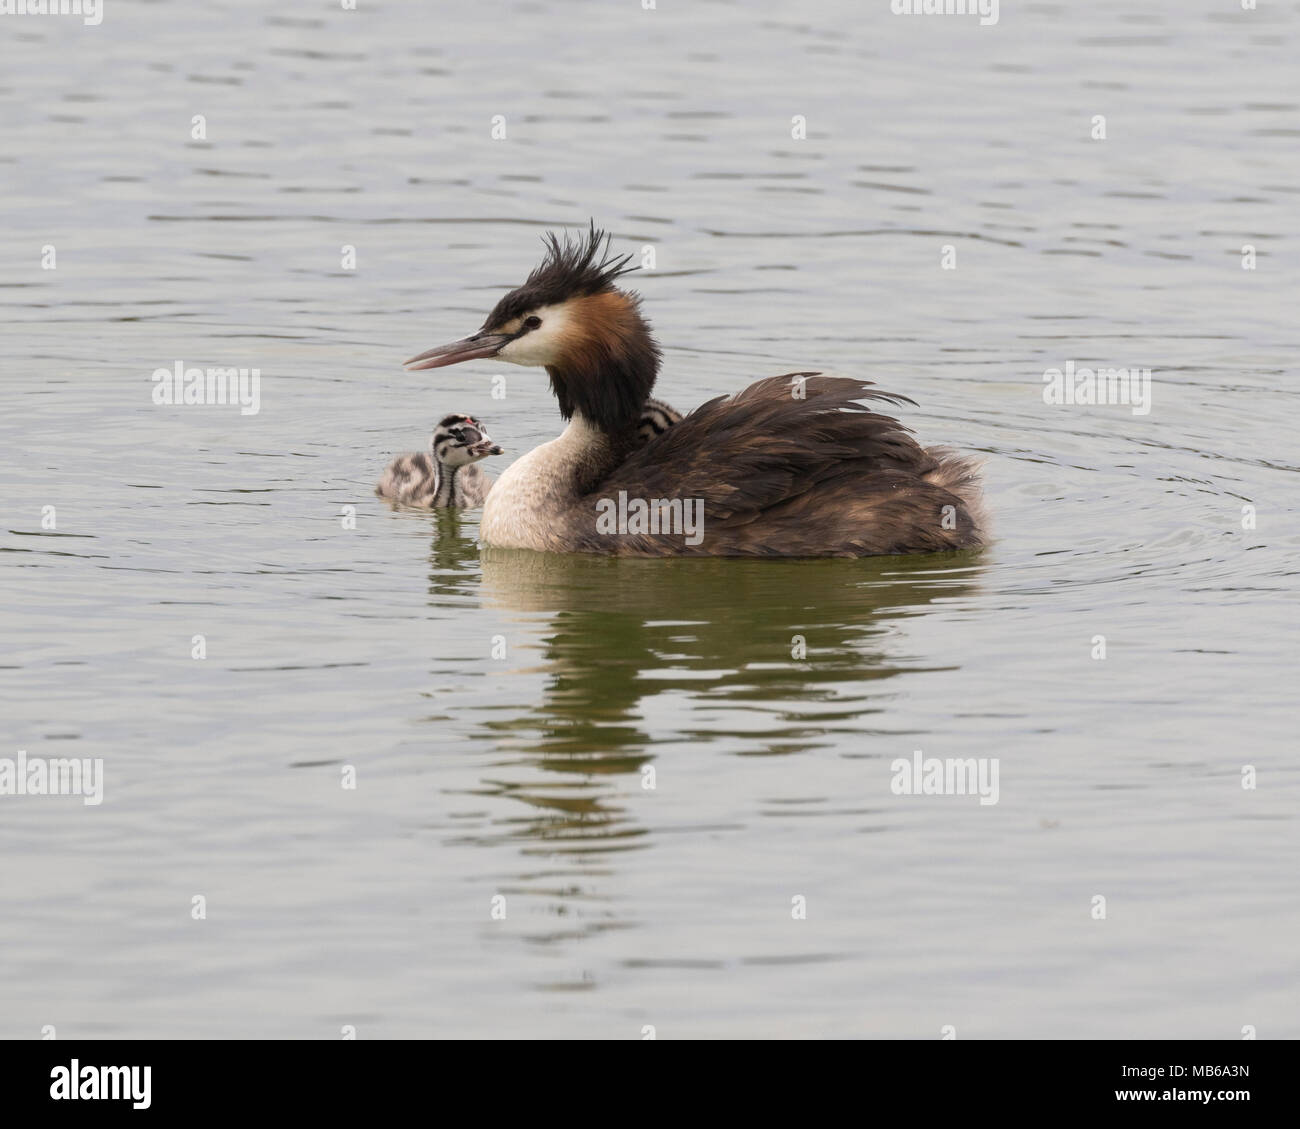 A Great Crested Grebe (Podiceps cristatus) with a chick at Lake Monger, Perth, Western Australia Stock Photo